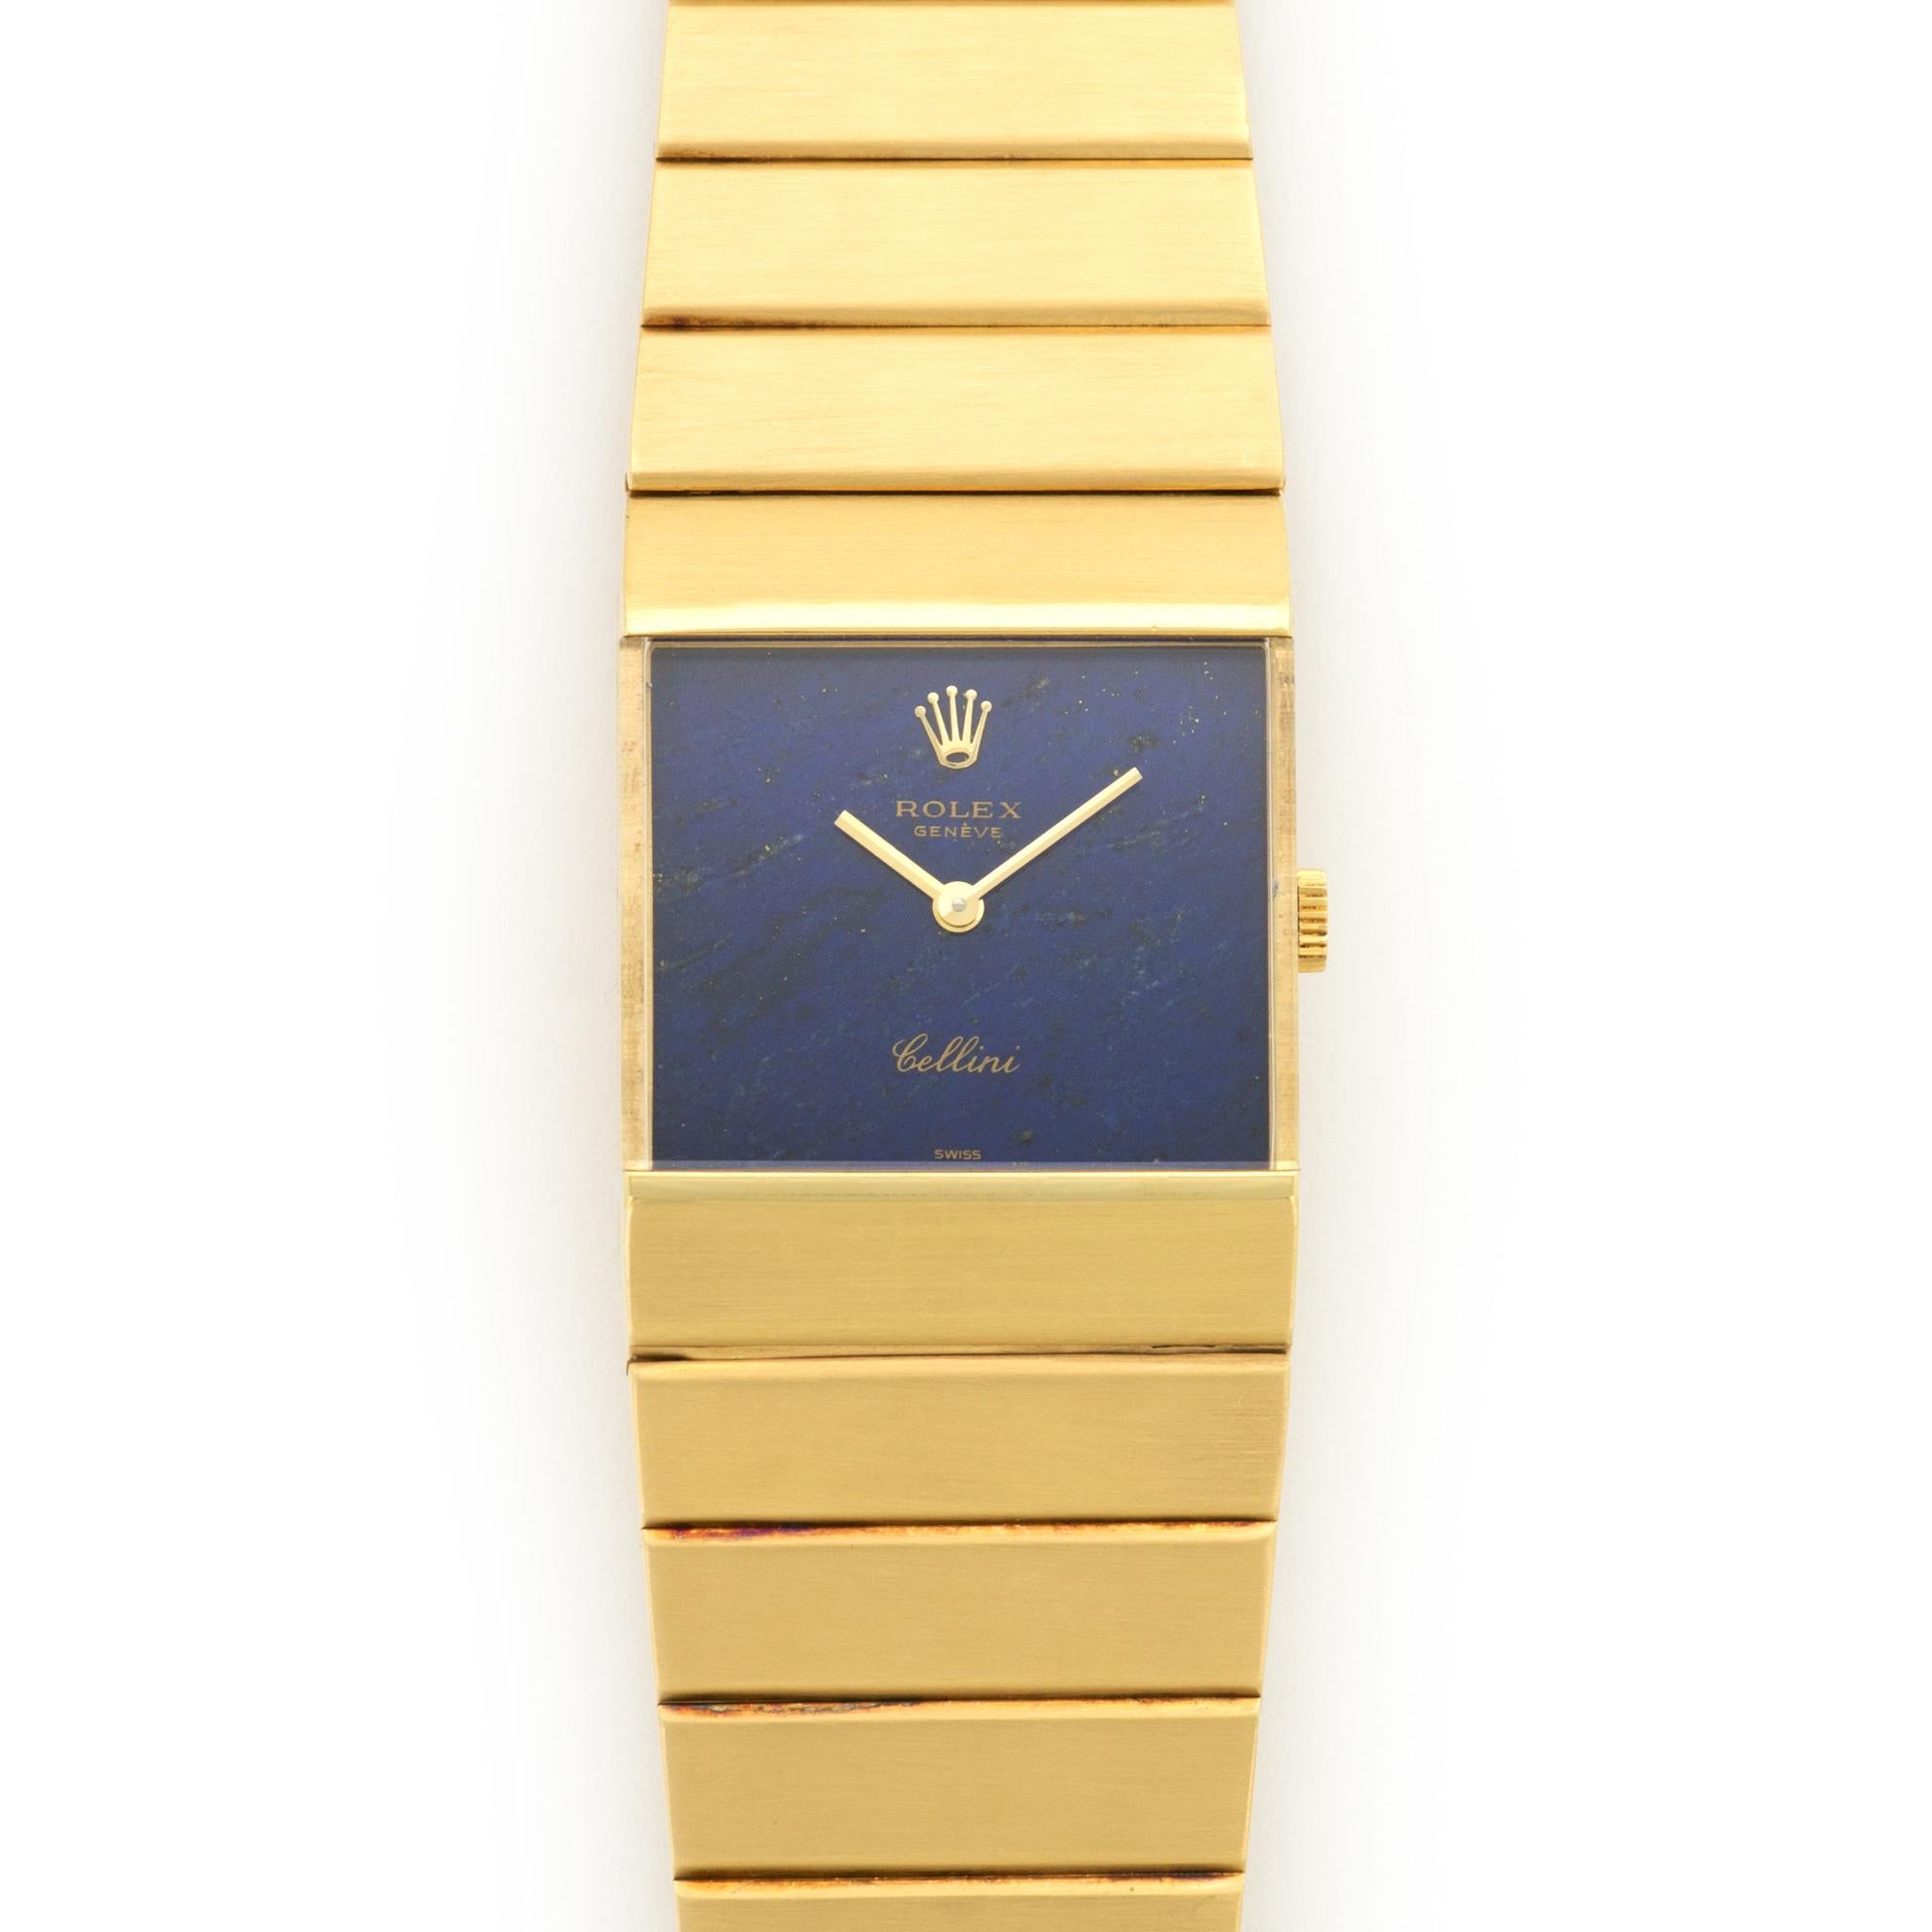 In the 1960s Rolex introduced the King Midas, a very different and exciting new watch that looked like no other. This Queen Midas (the women's version of the King Midas), features a rare Lapis dial. Truly a staple piece, this watch is sure to be